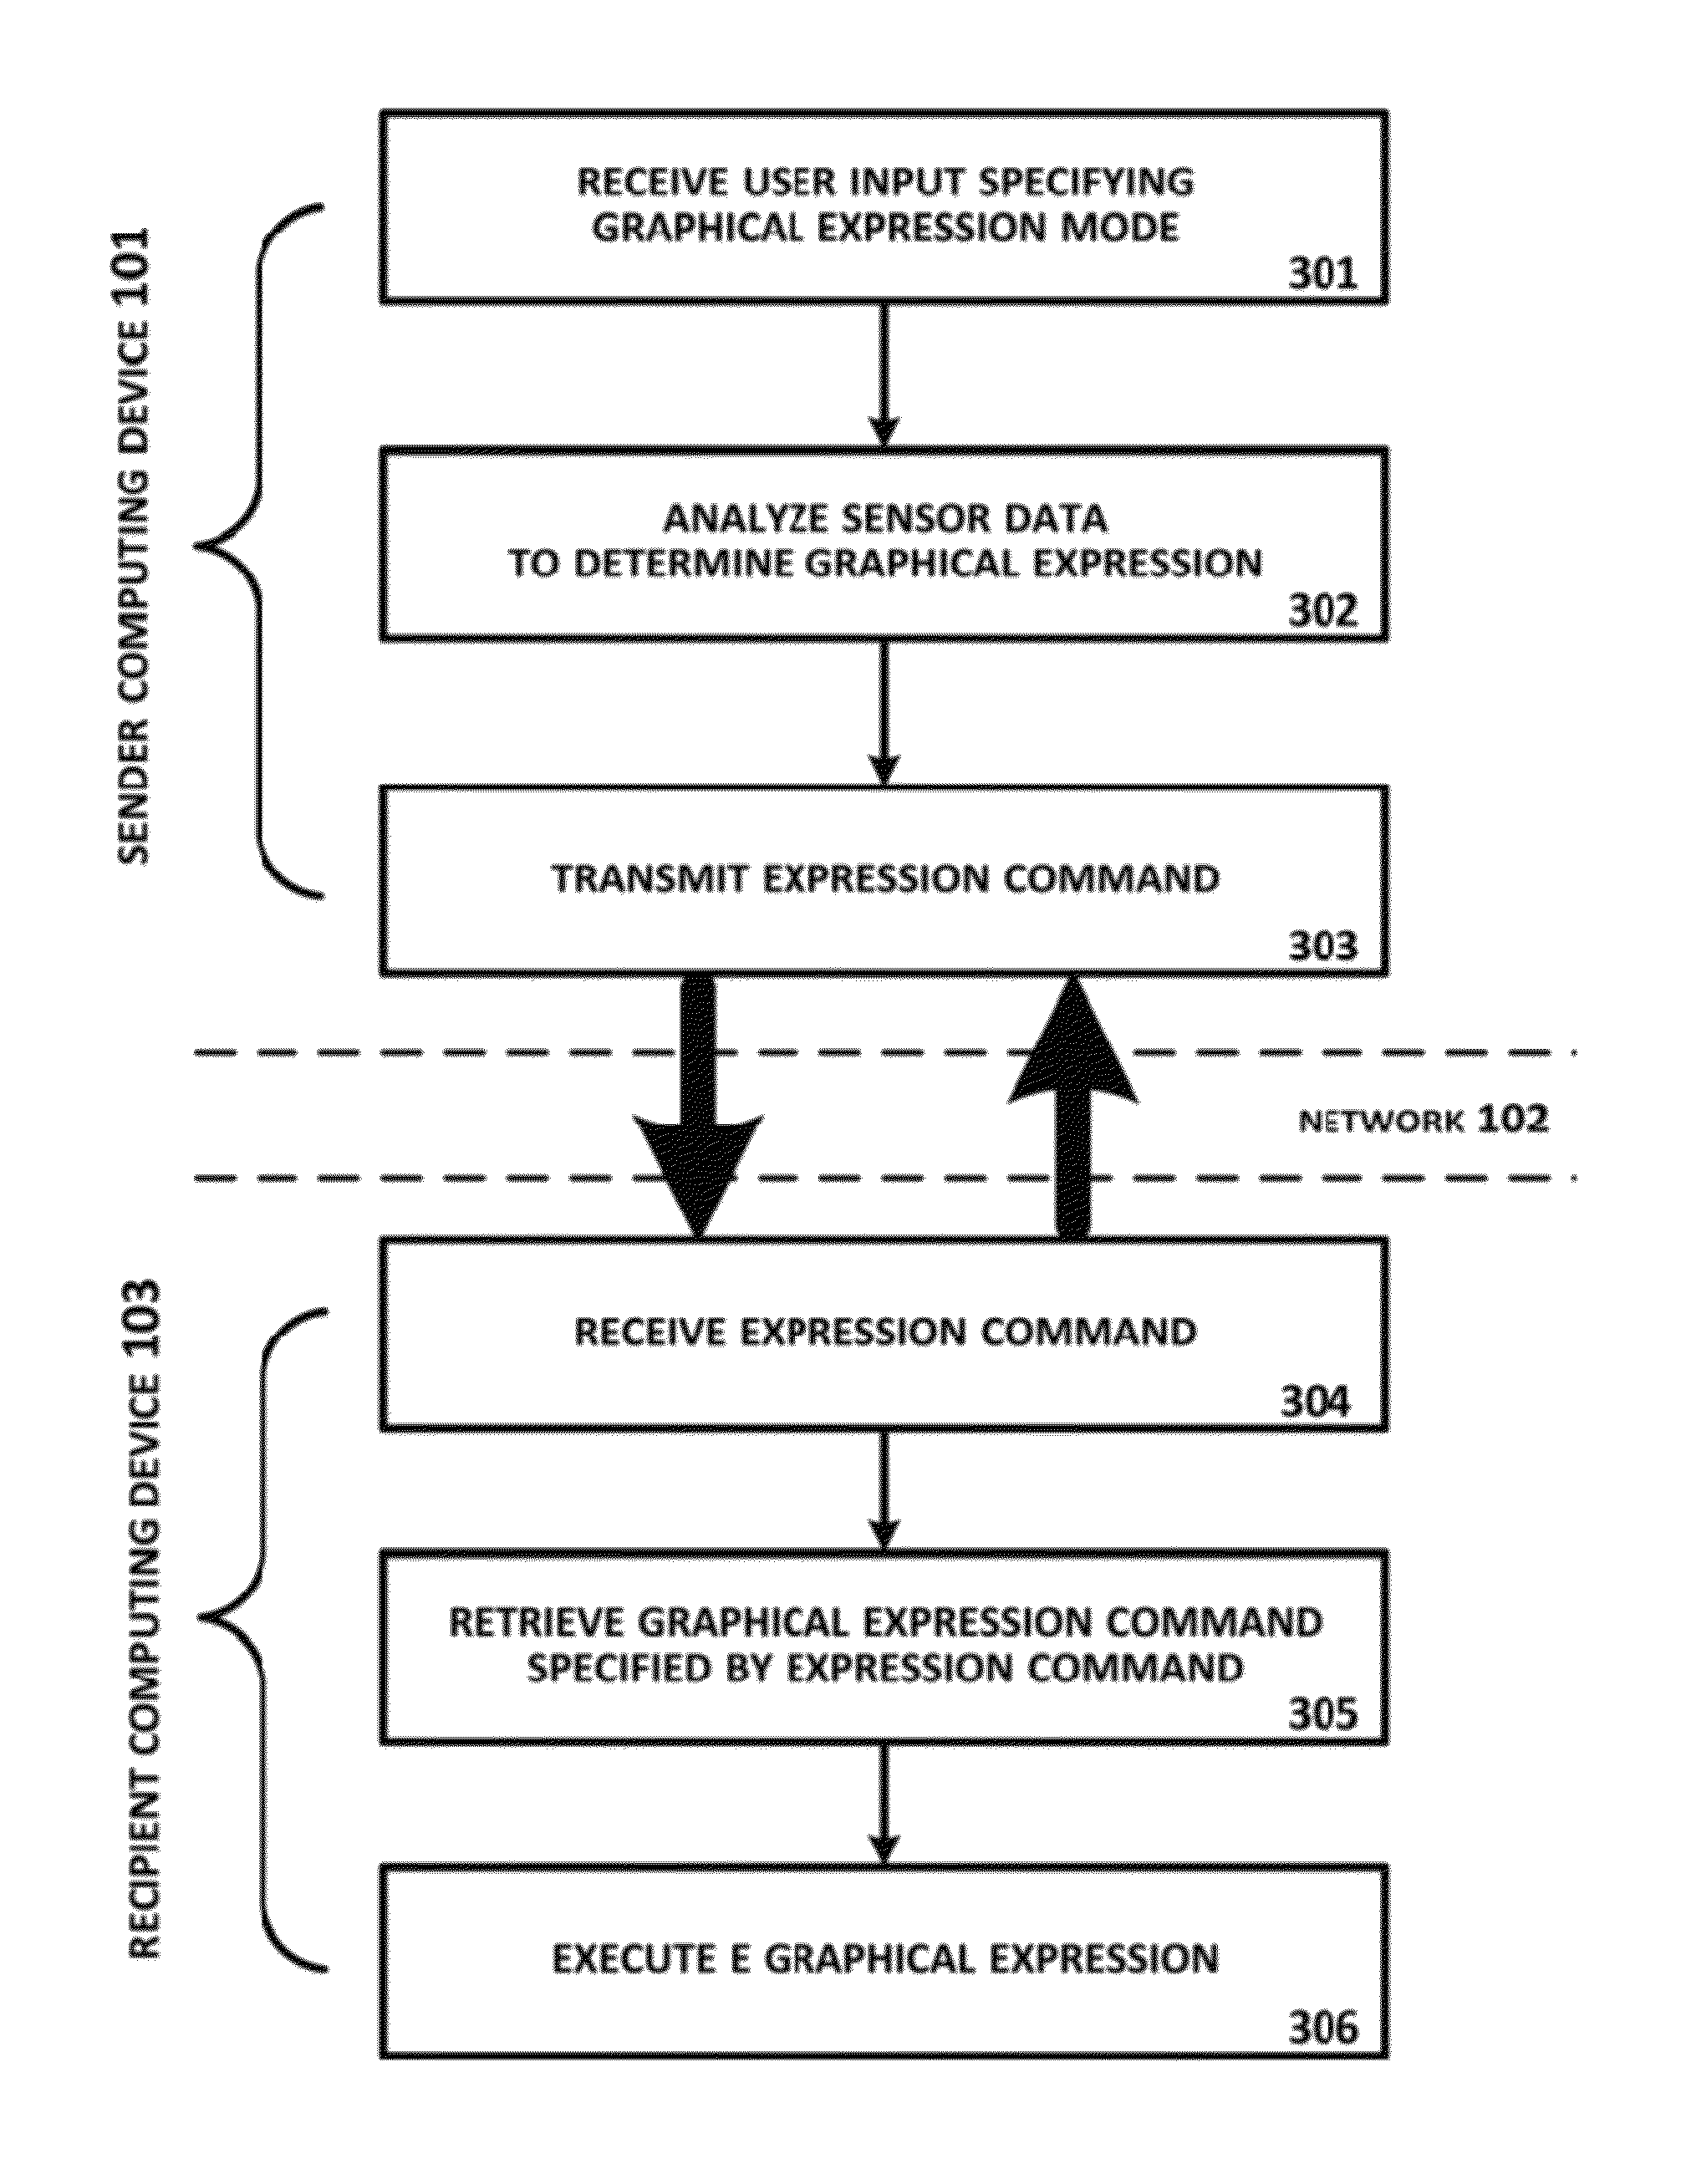 System and method for graphical expression during text messaging communications